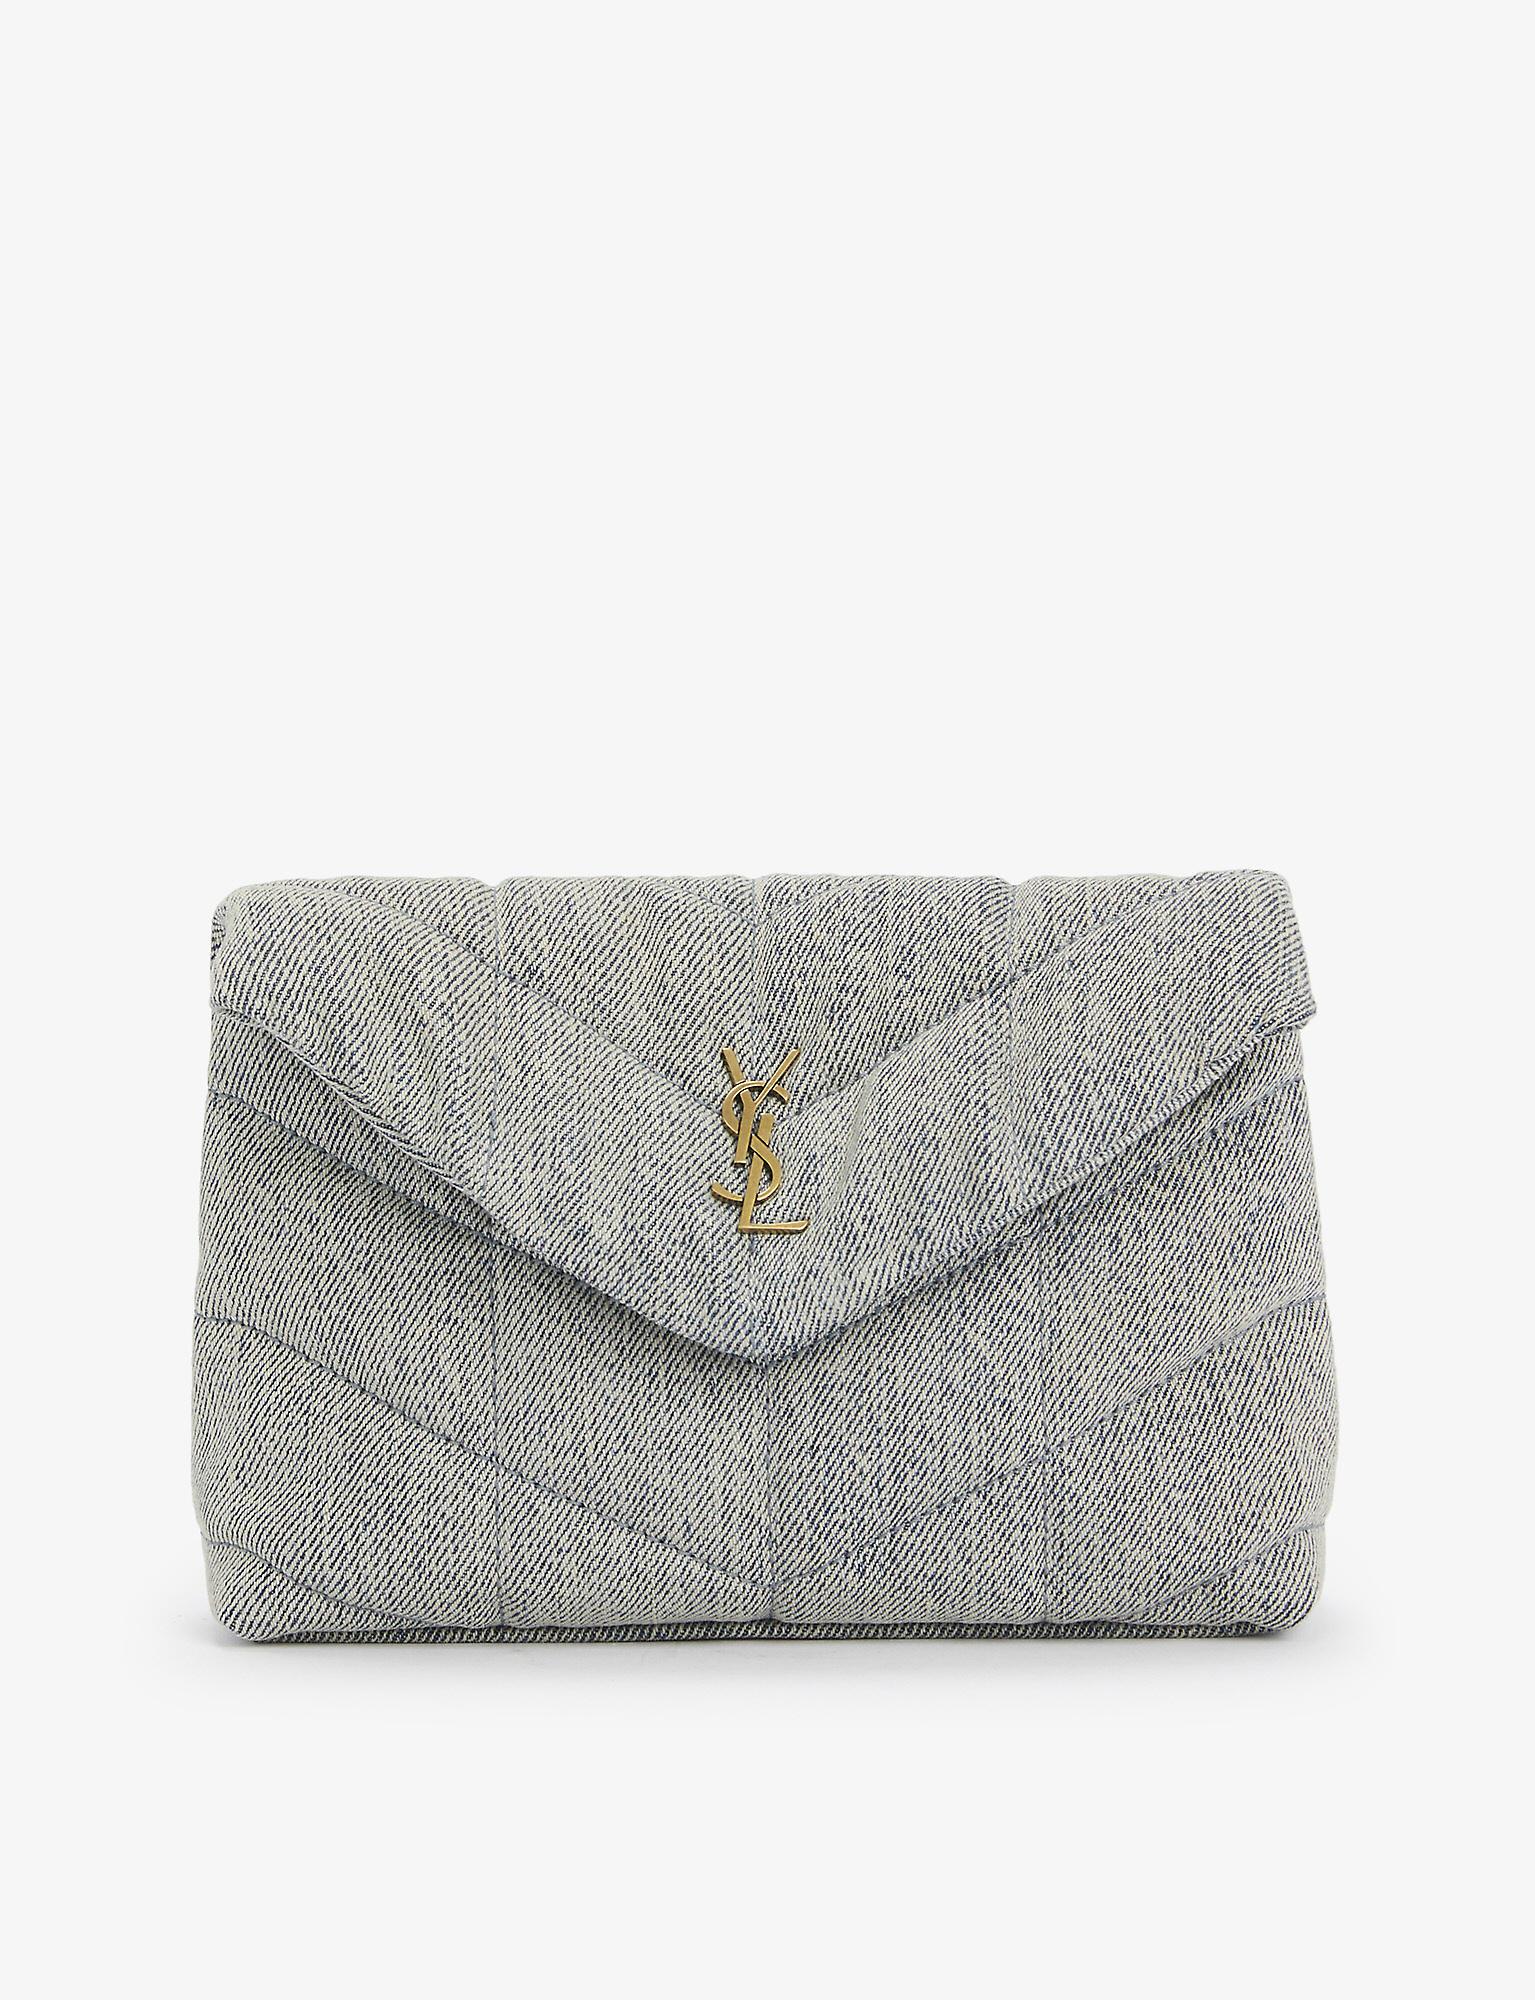 Womens Bags Clutches and evening bags Saint Laurent Puffer Quilted Clutch Bag in Grey Grey 